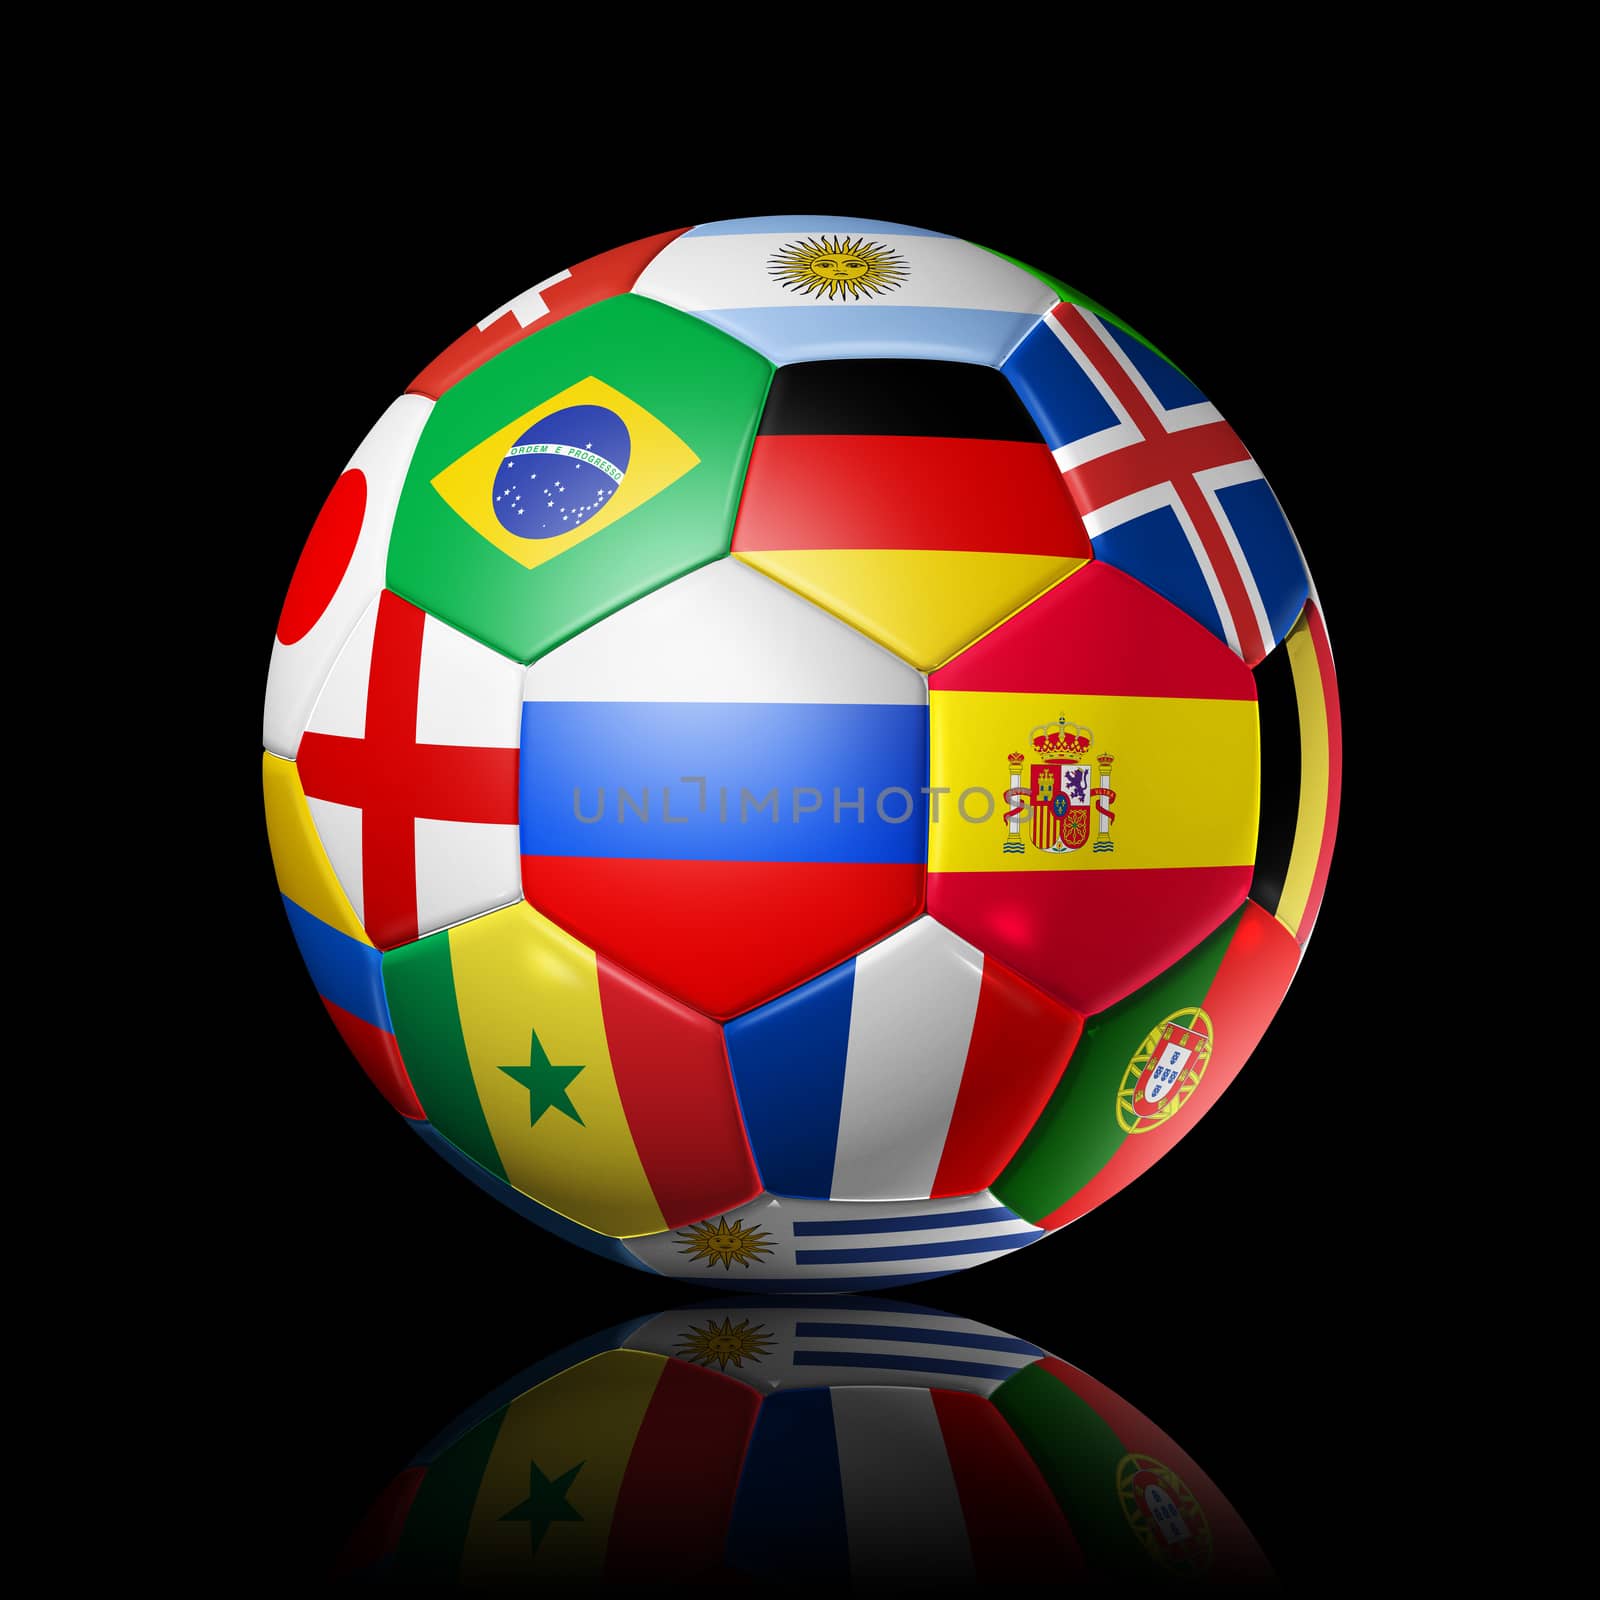 Russia 2018. Football soccer ball with team national flags on bl by daboost